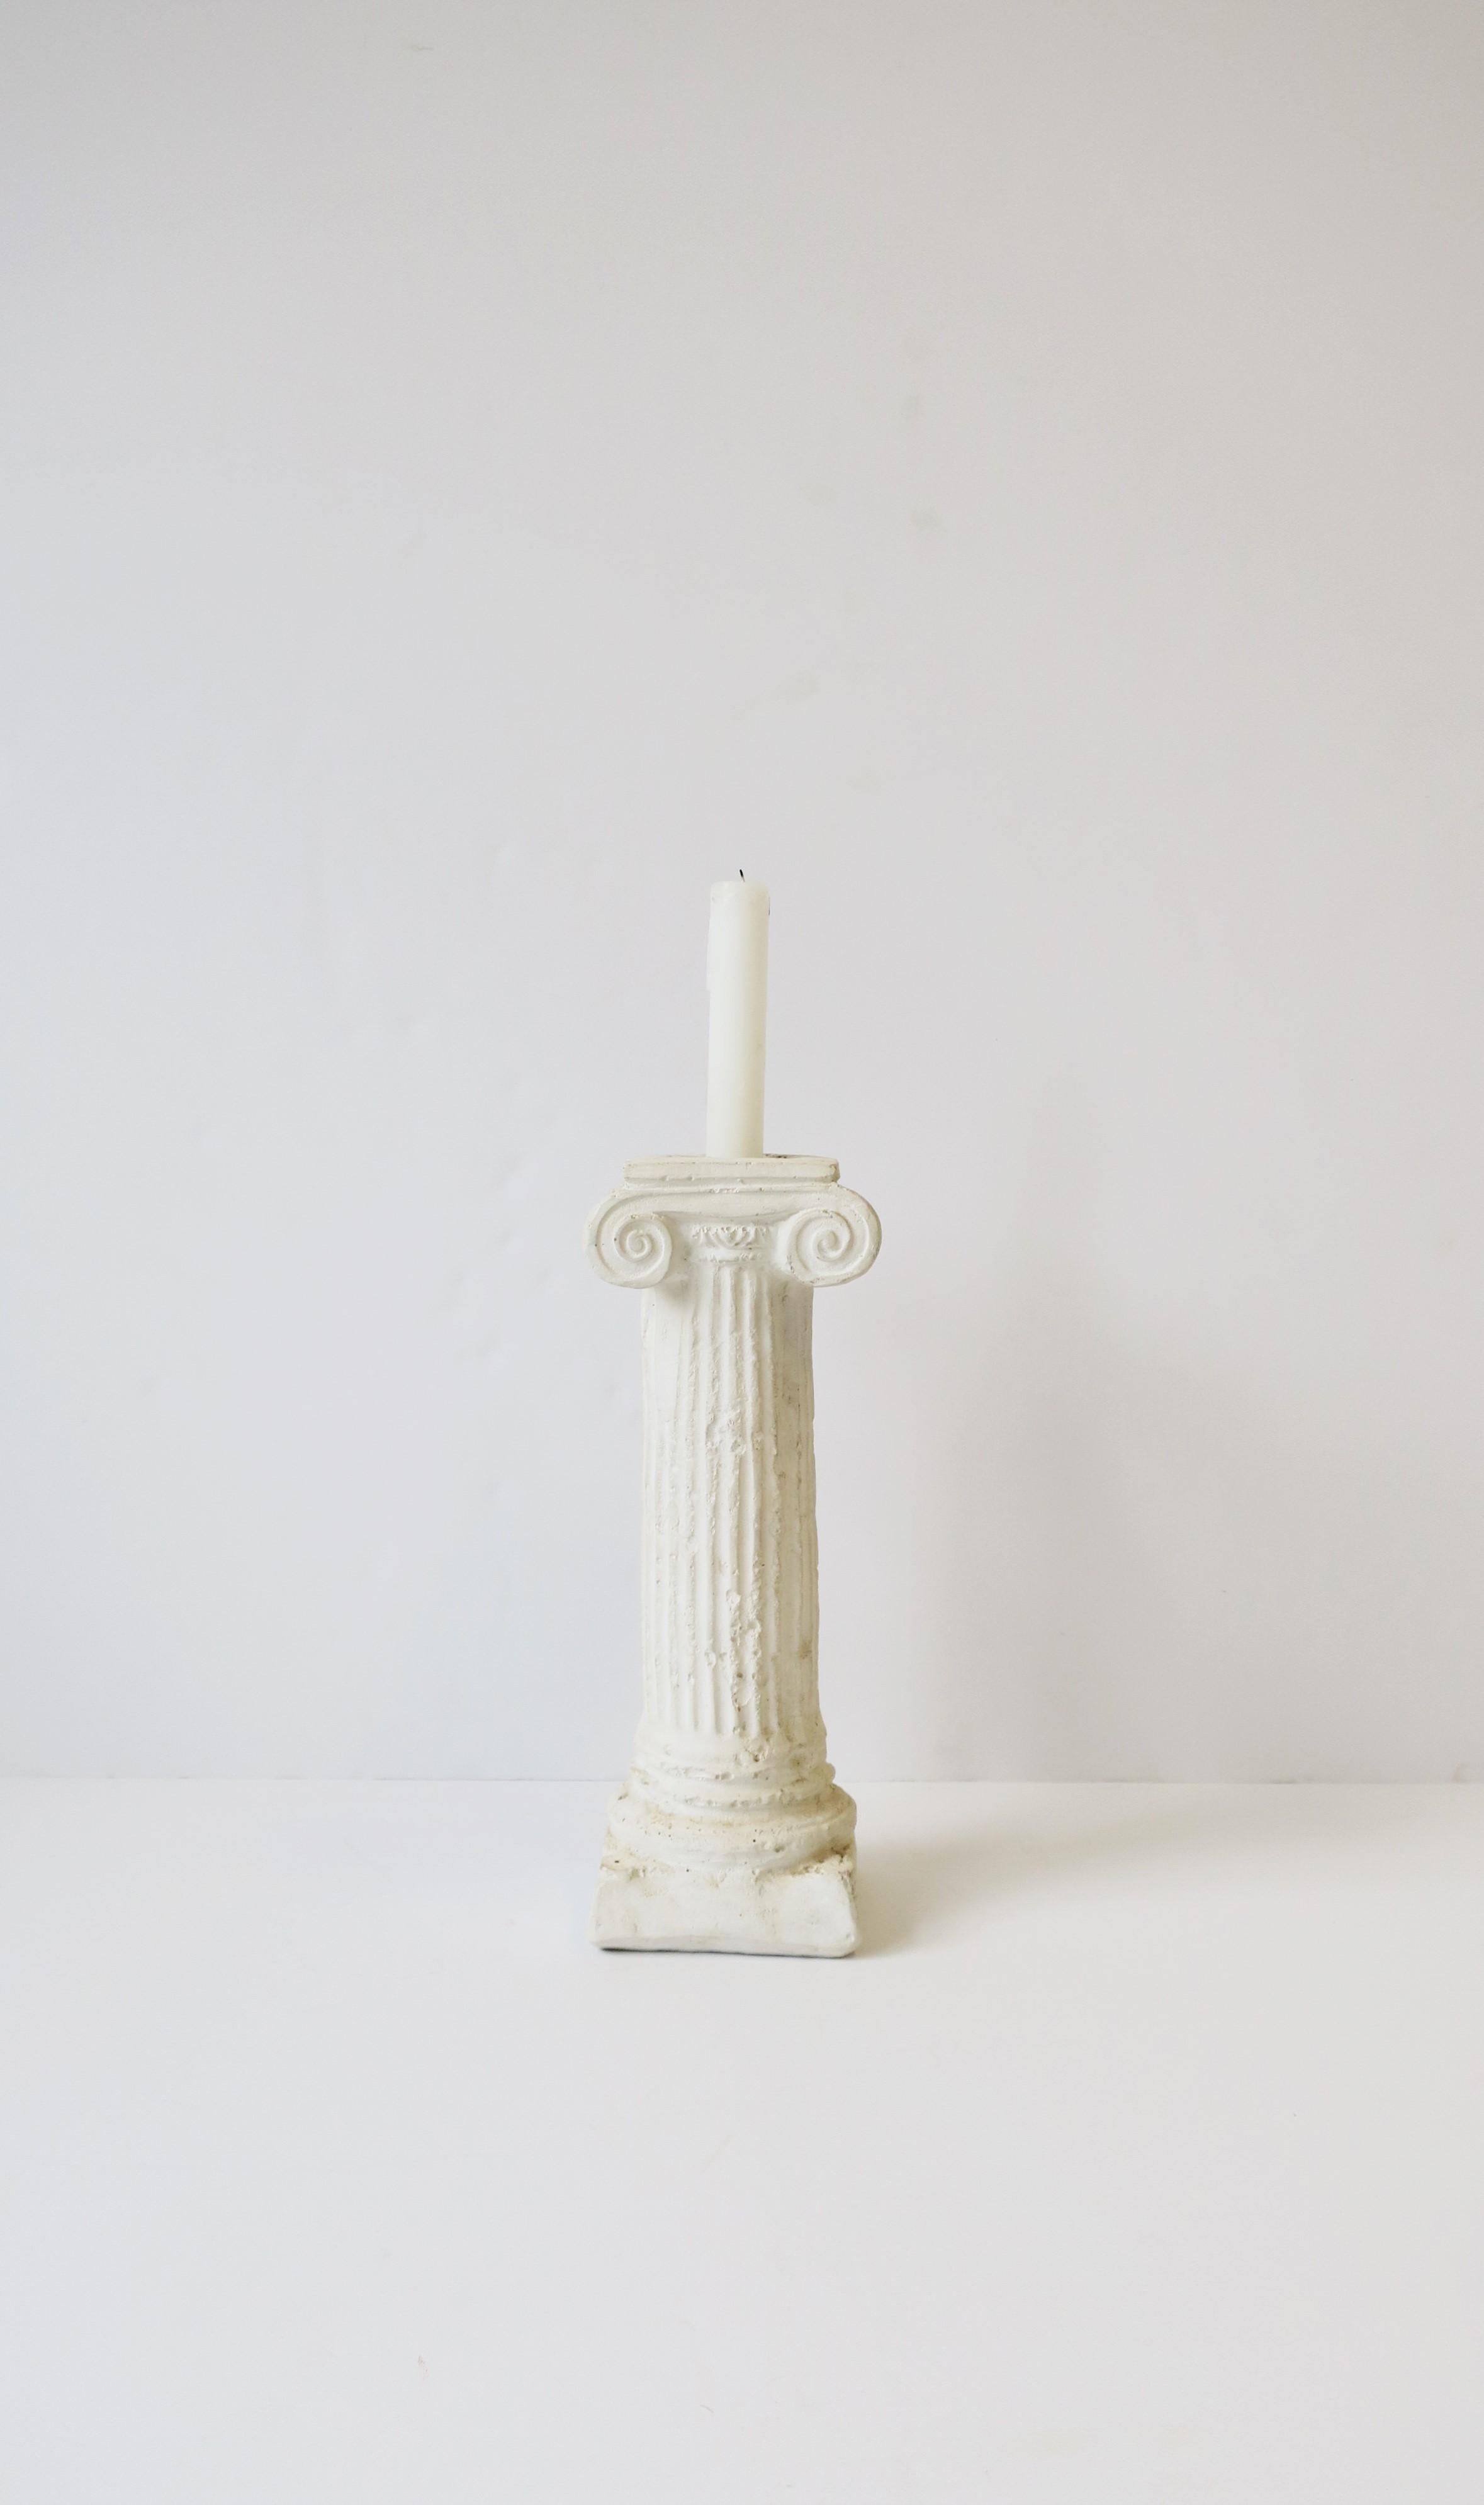 A substantial white plaster Ionic column pillar candlestick holder in the Neoclassical design style, circa 1980s. Candlestick column can also work as a standalone decorative object or bookend. Piece is a nice height measuring 11.07